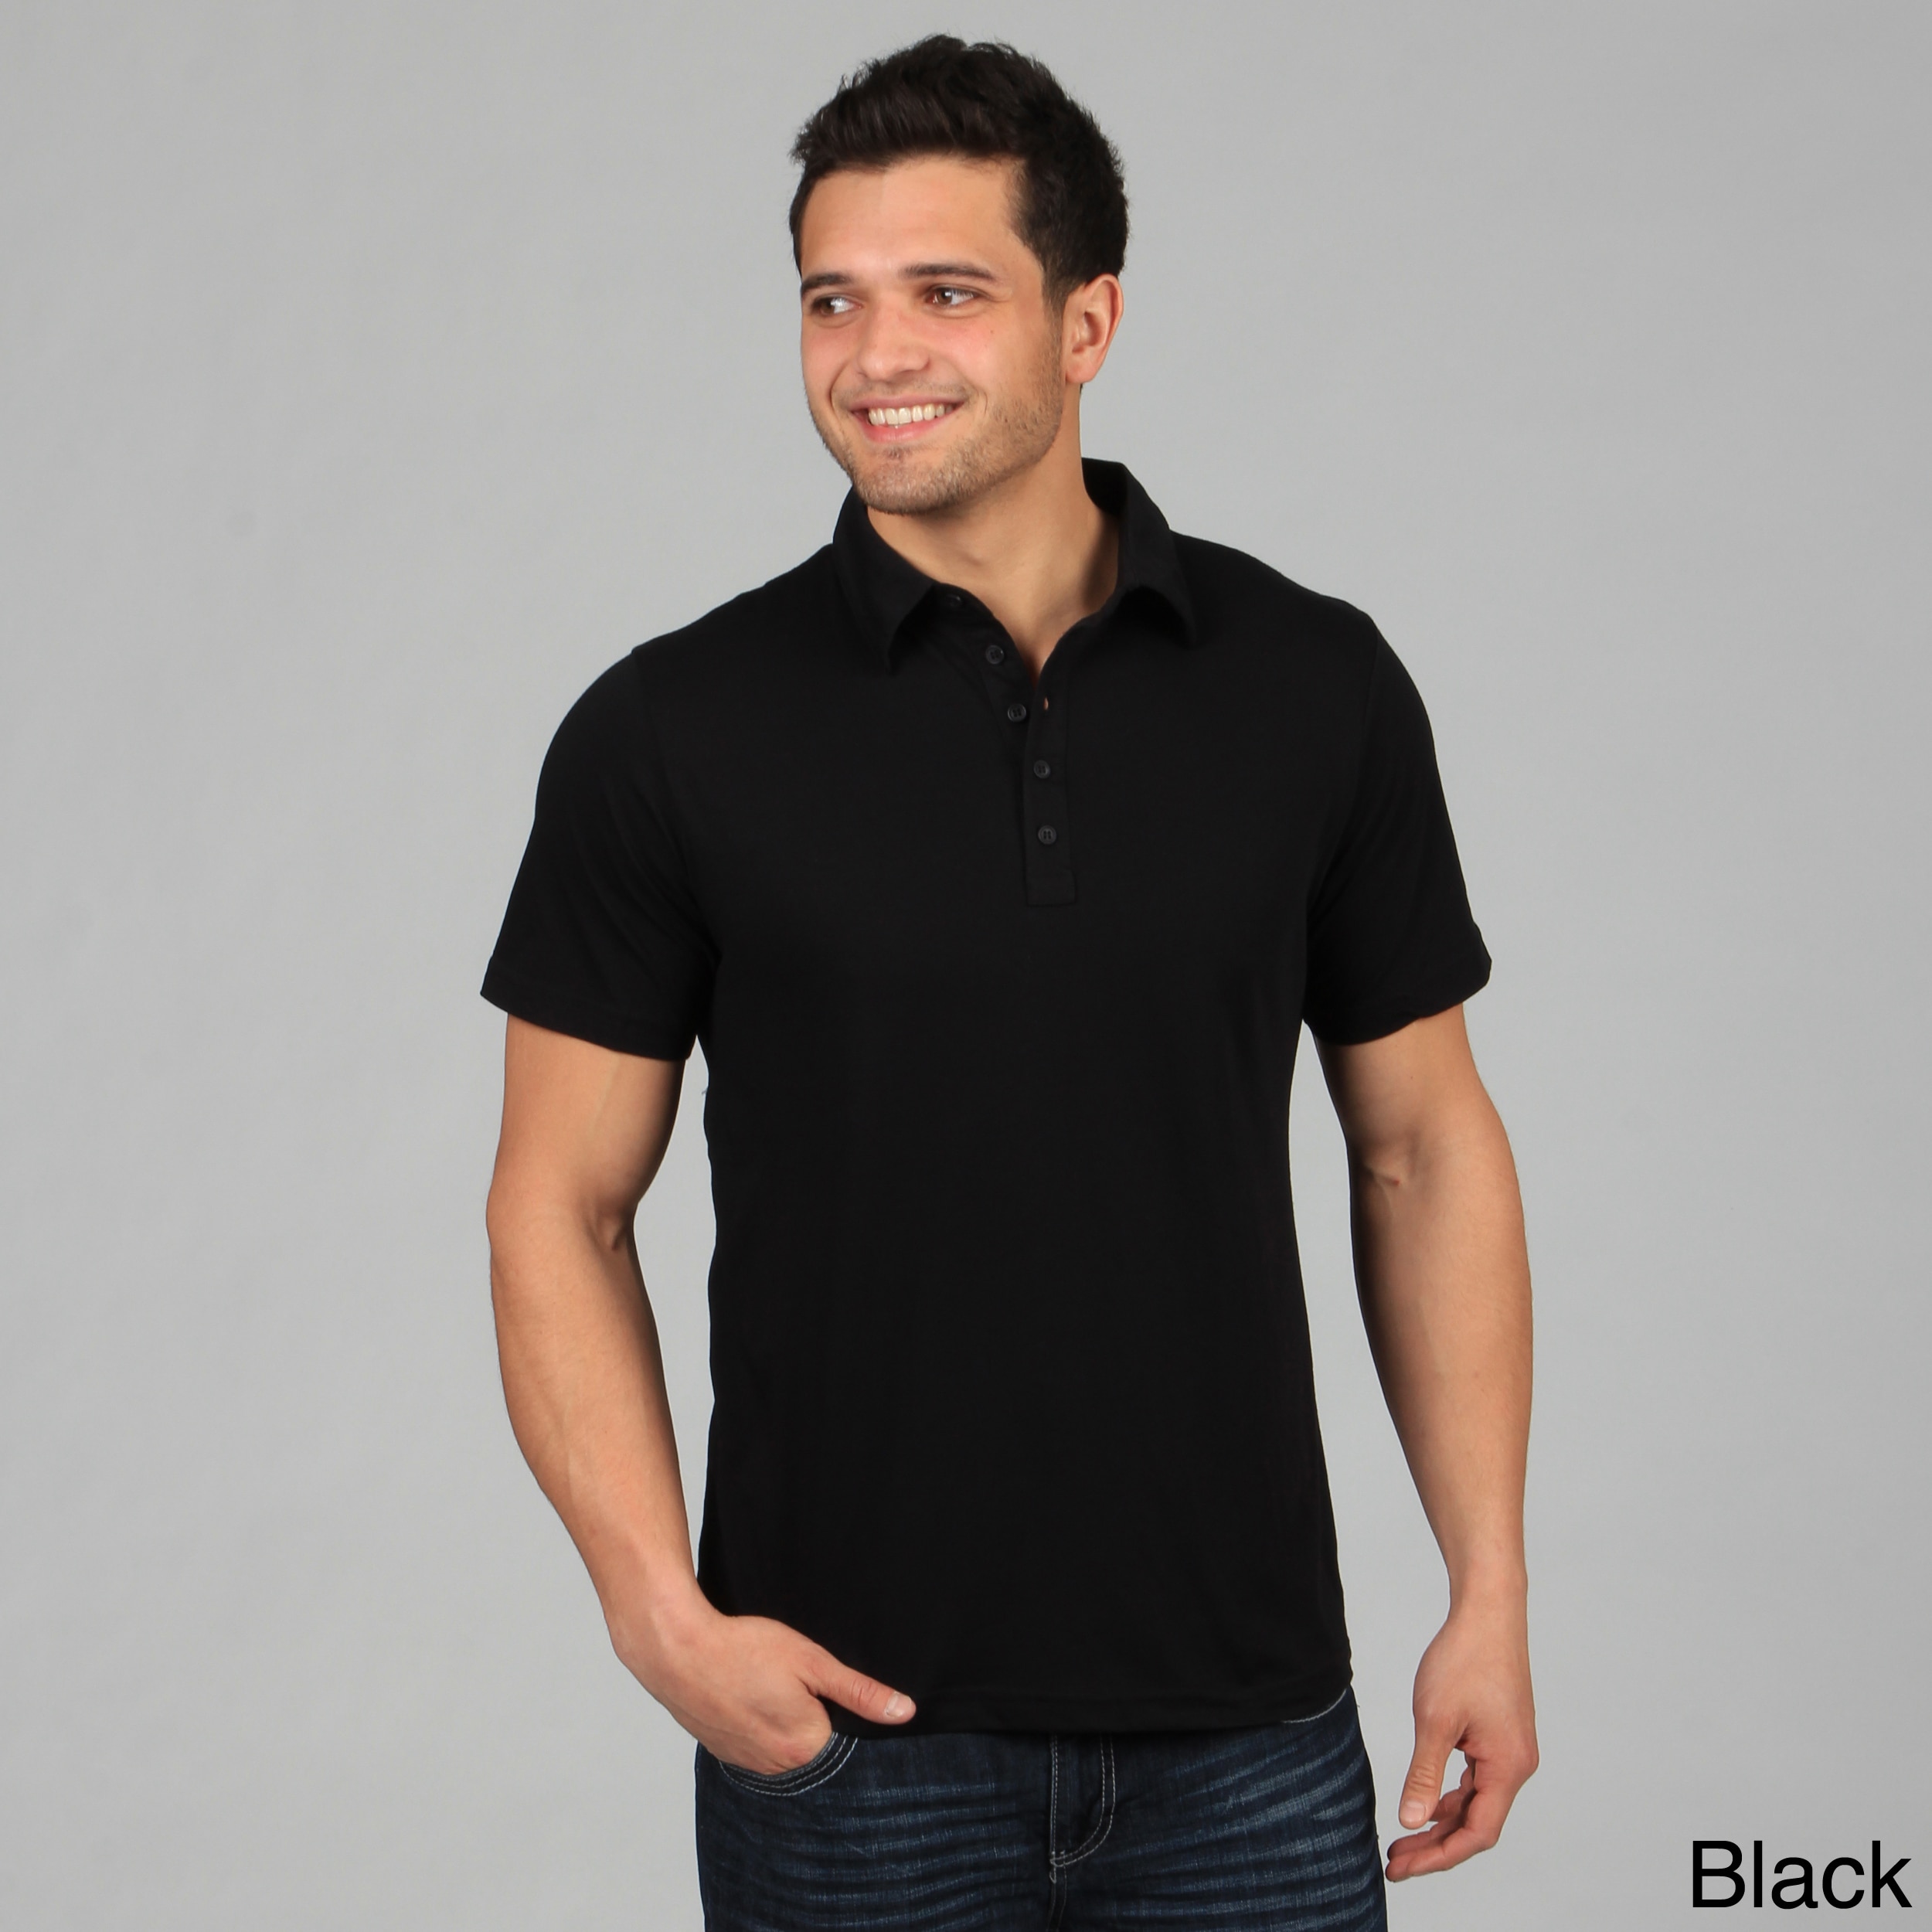 Mens 5 button Jersey Polo Shirt (55 percent cotton, 45 percent polyester Care Instructions Machine washableModel number QXJerseyPoloAll measurements are approximate and may vary by size)